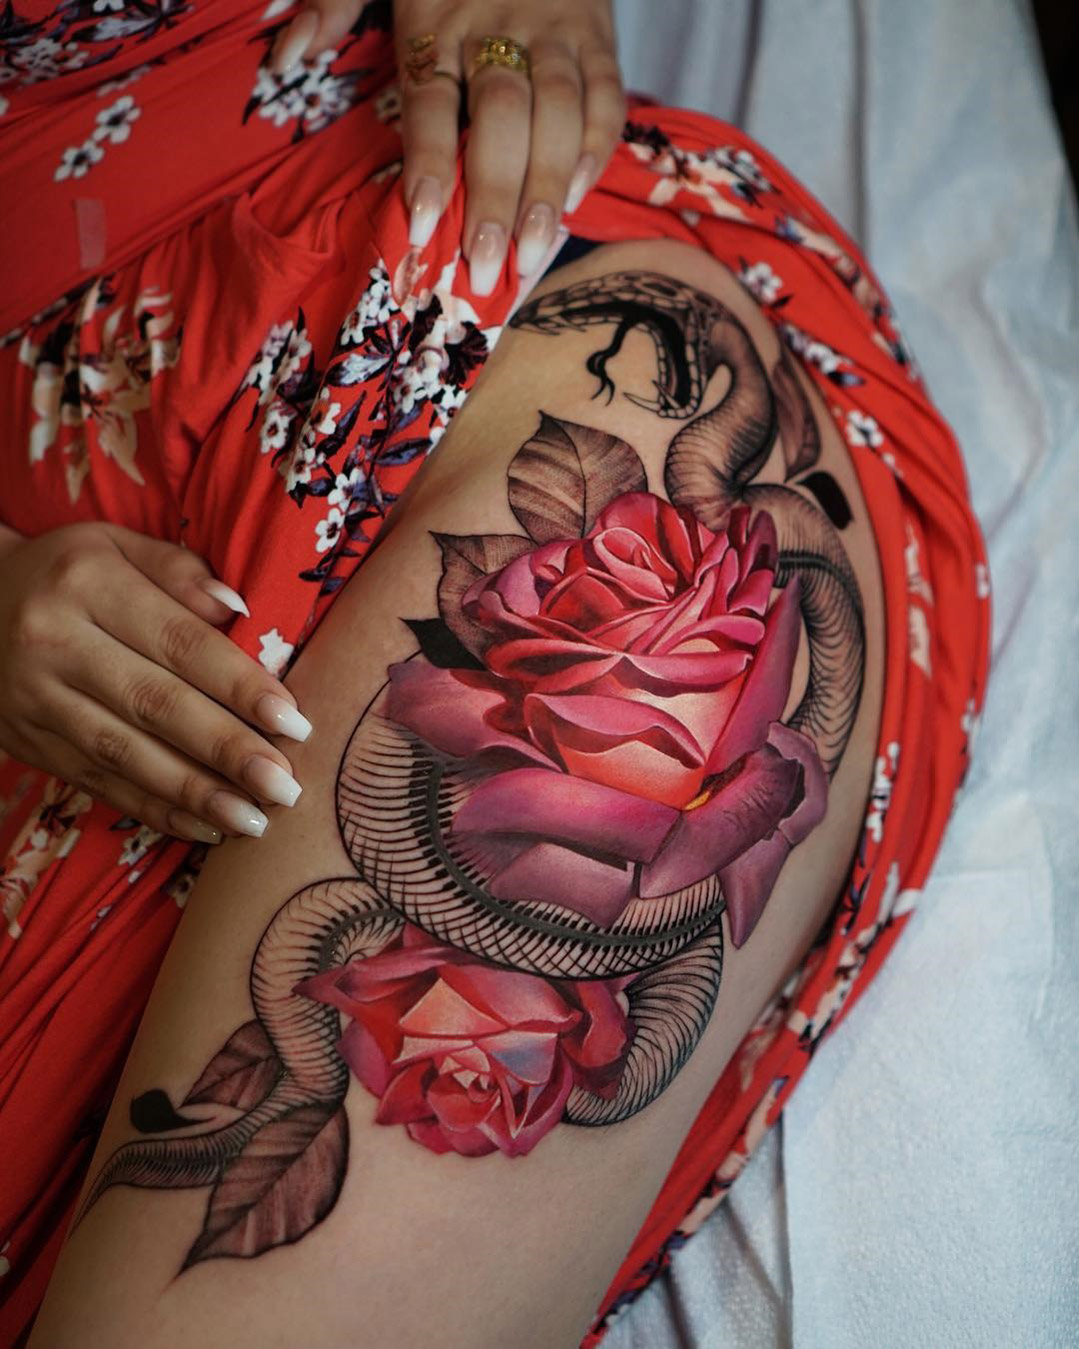 Snake and Rose Tattoo Meaning: The Deeper Meanings Behind Popular Tattoo Designs